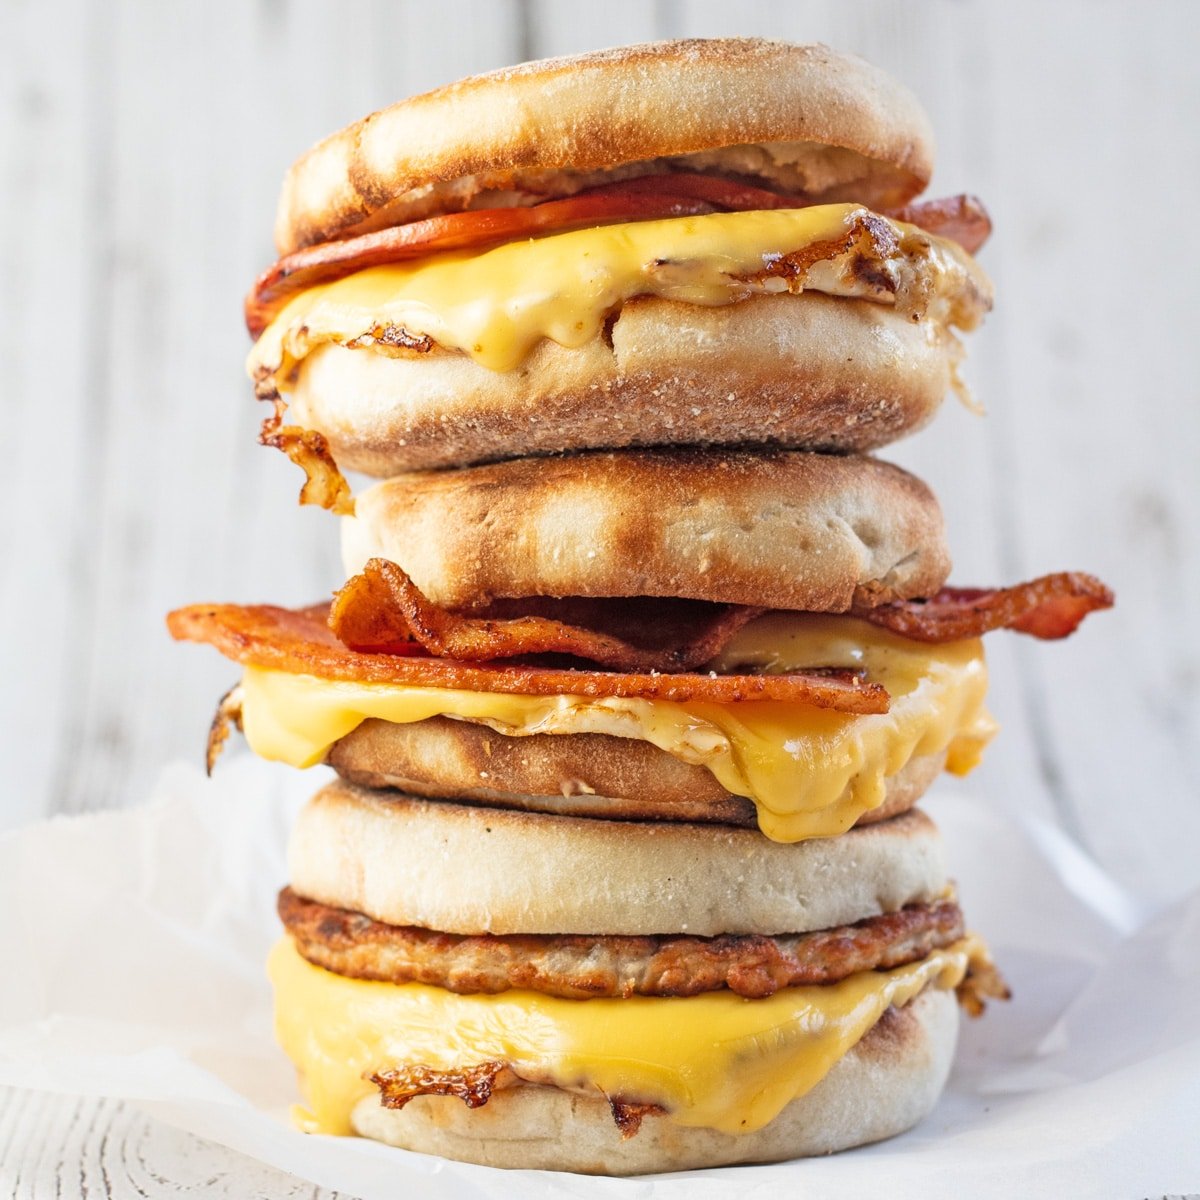 Breakfast sandwich variety with 3 sandwiches stacked.